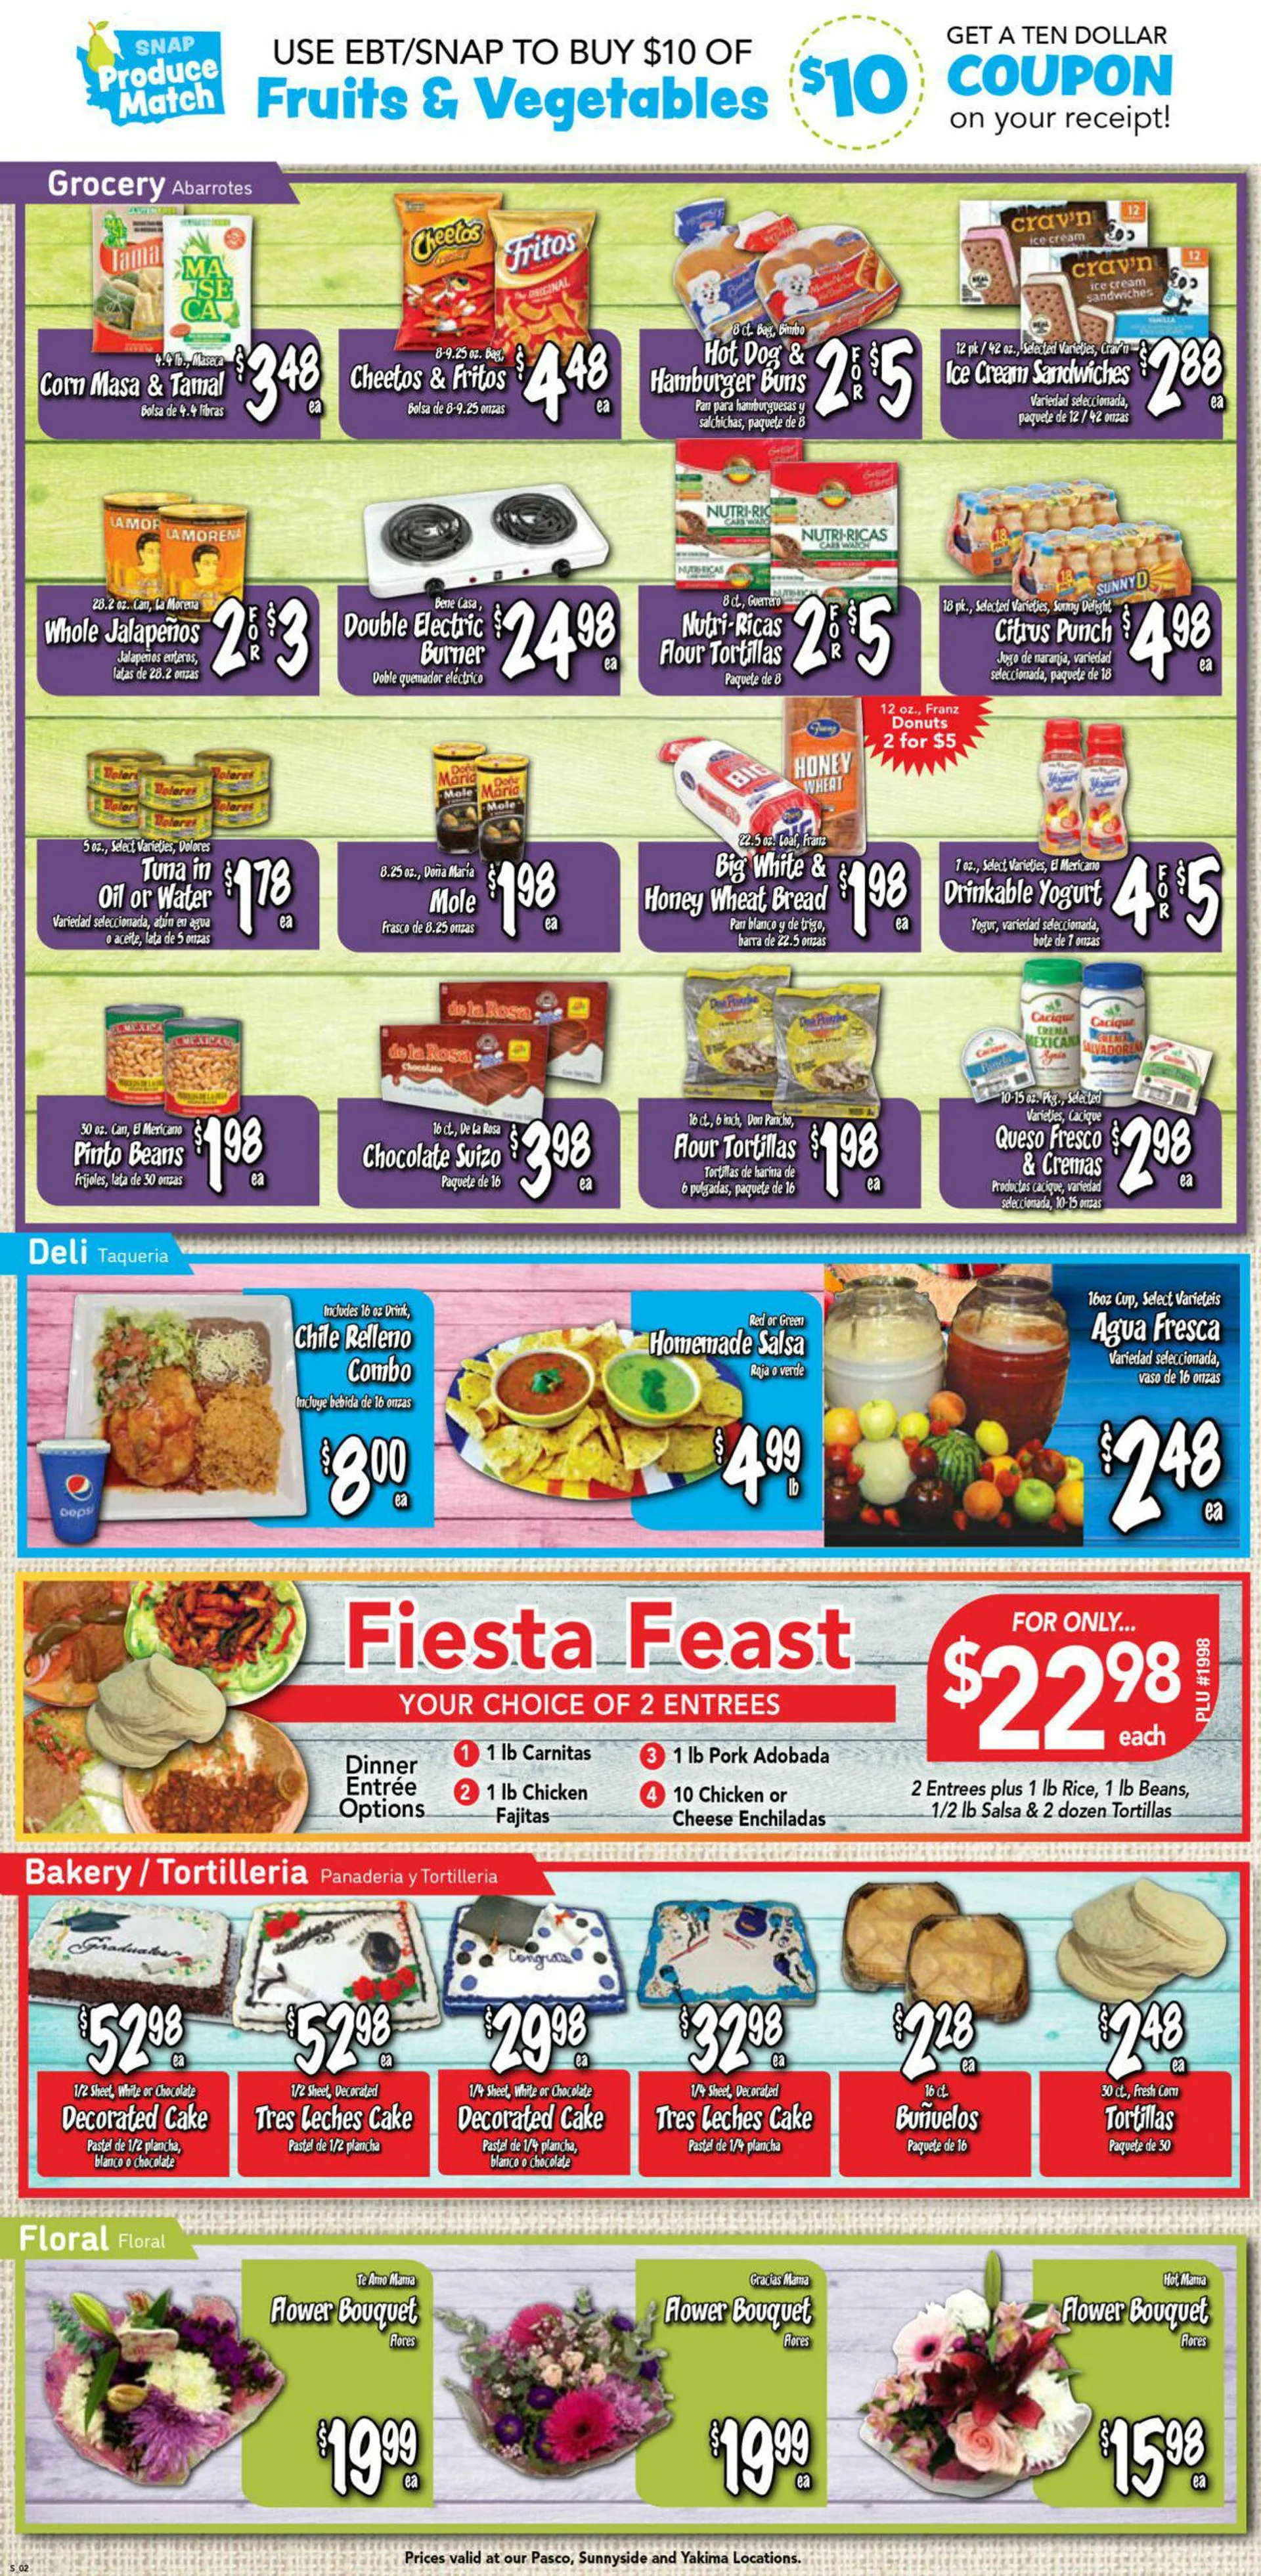 Fiesta Foods SuperMarkets Current weekly ad - 2